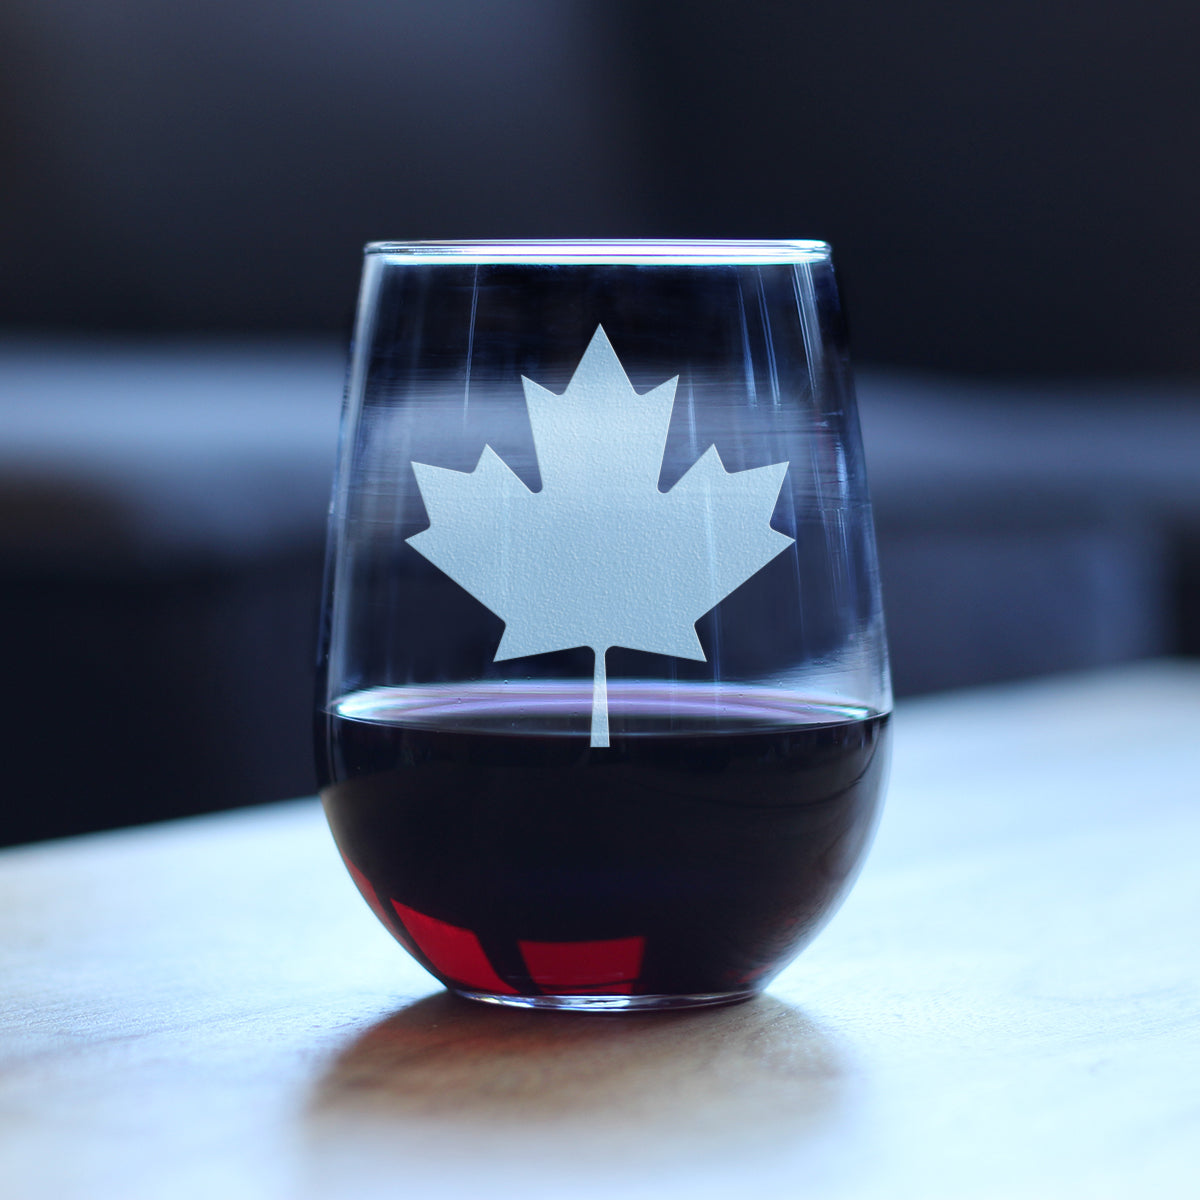 Canada Maple Leaf Stemless Wine Glass - Canadian Flag Gifts and Decor for Women and Men - Large 17 Oz Glasses